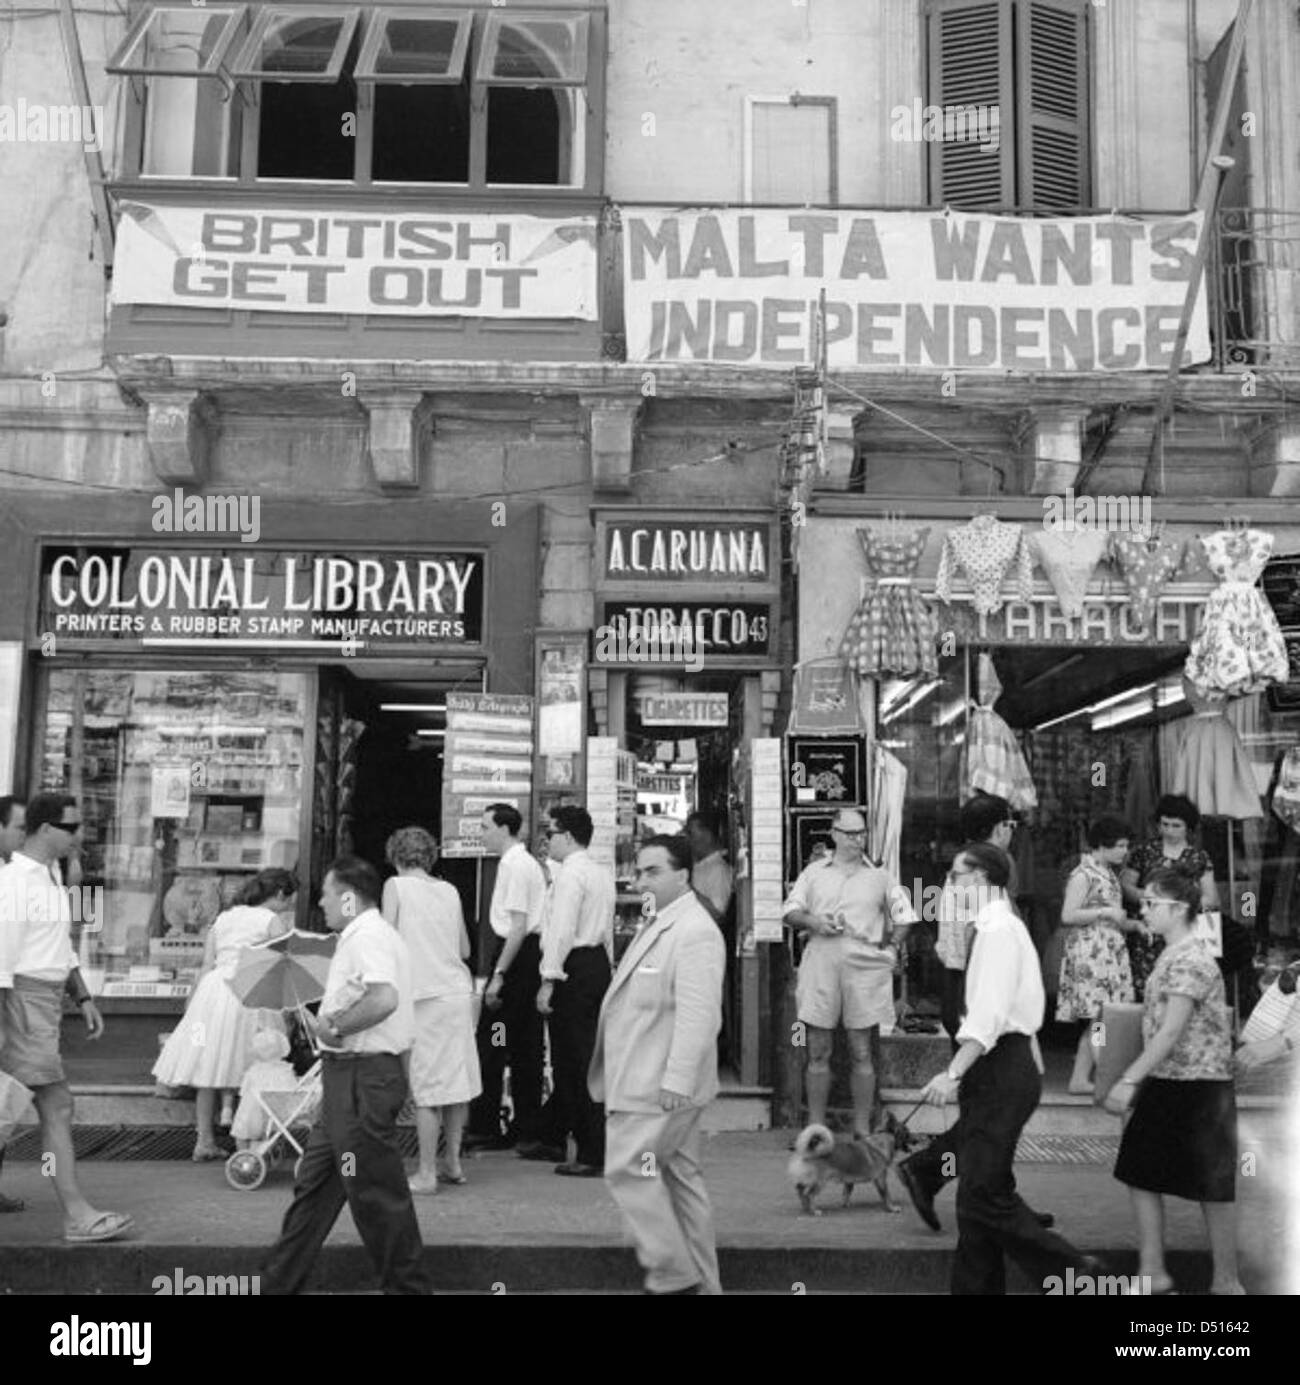 A view of shops with anti-British and pro-Independence signs, possibly on Kings Street, Valetta, Malta Stock Photo